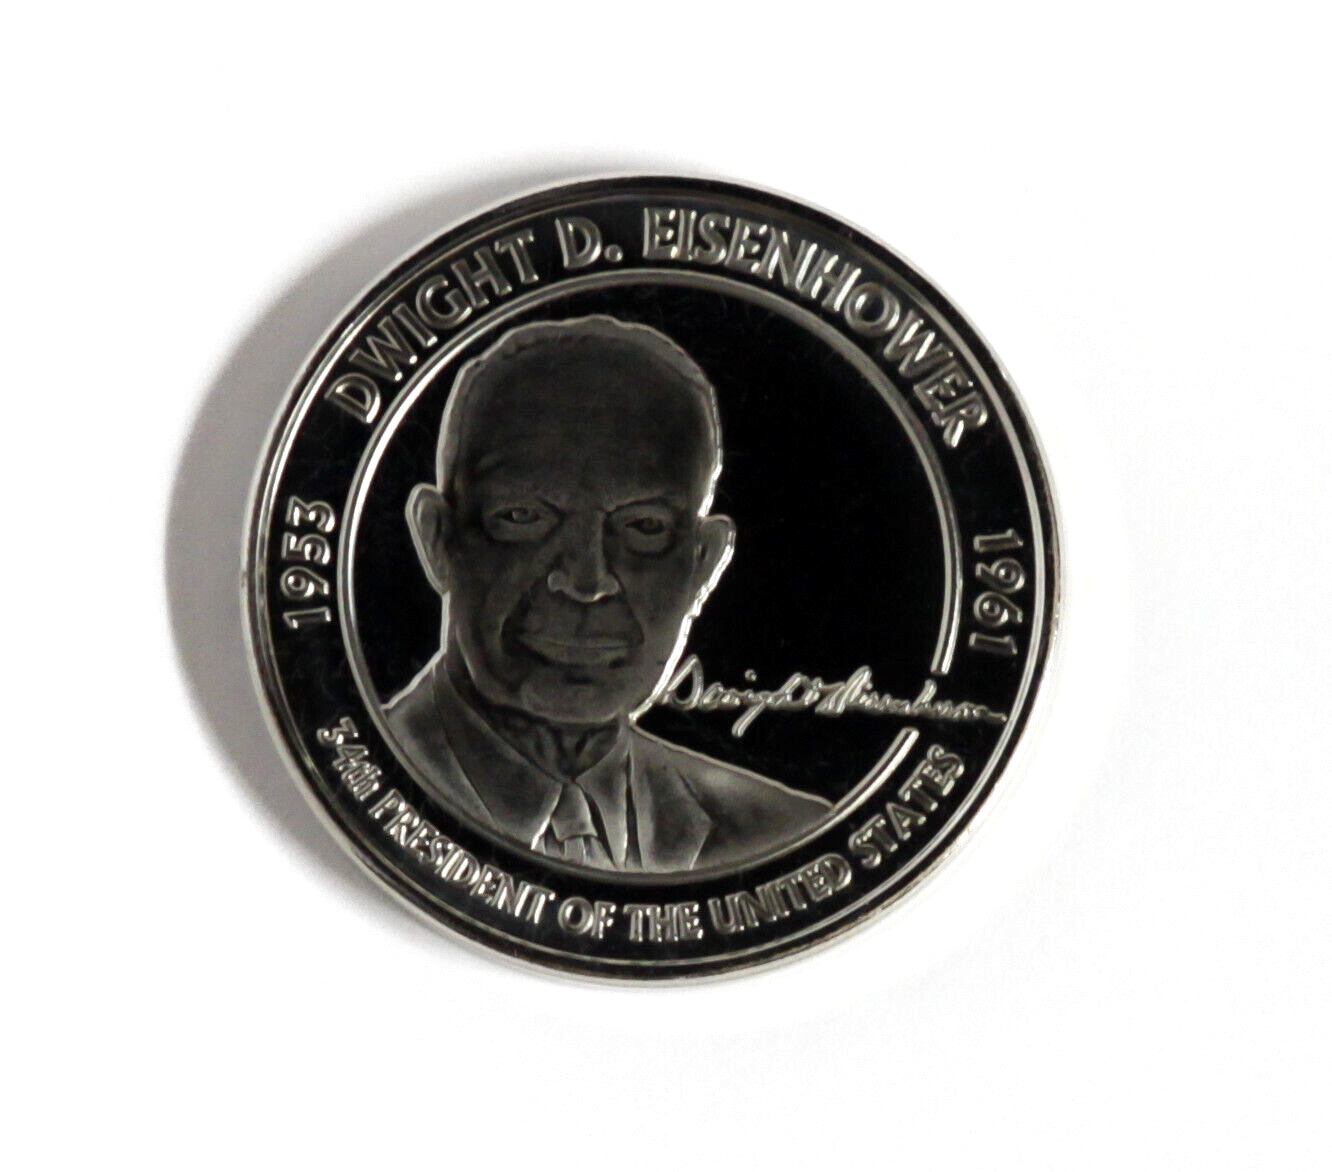 Dwight D. Eisenhower 34th President 1953-1961 Commemorative Proof Coin